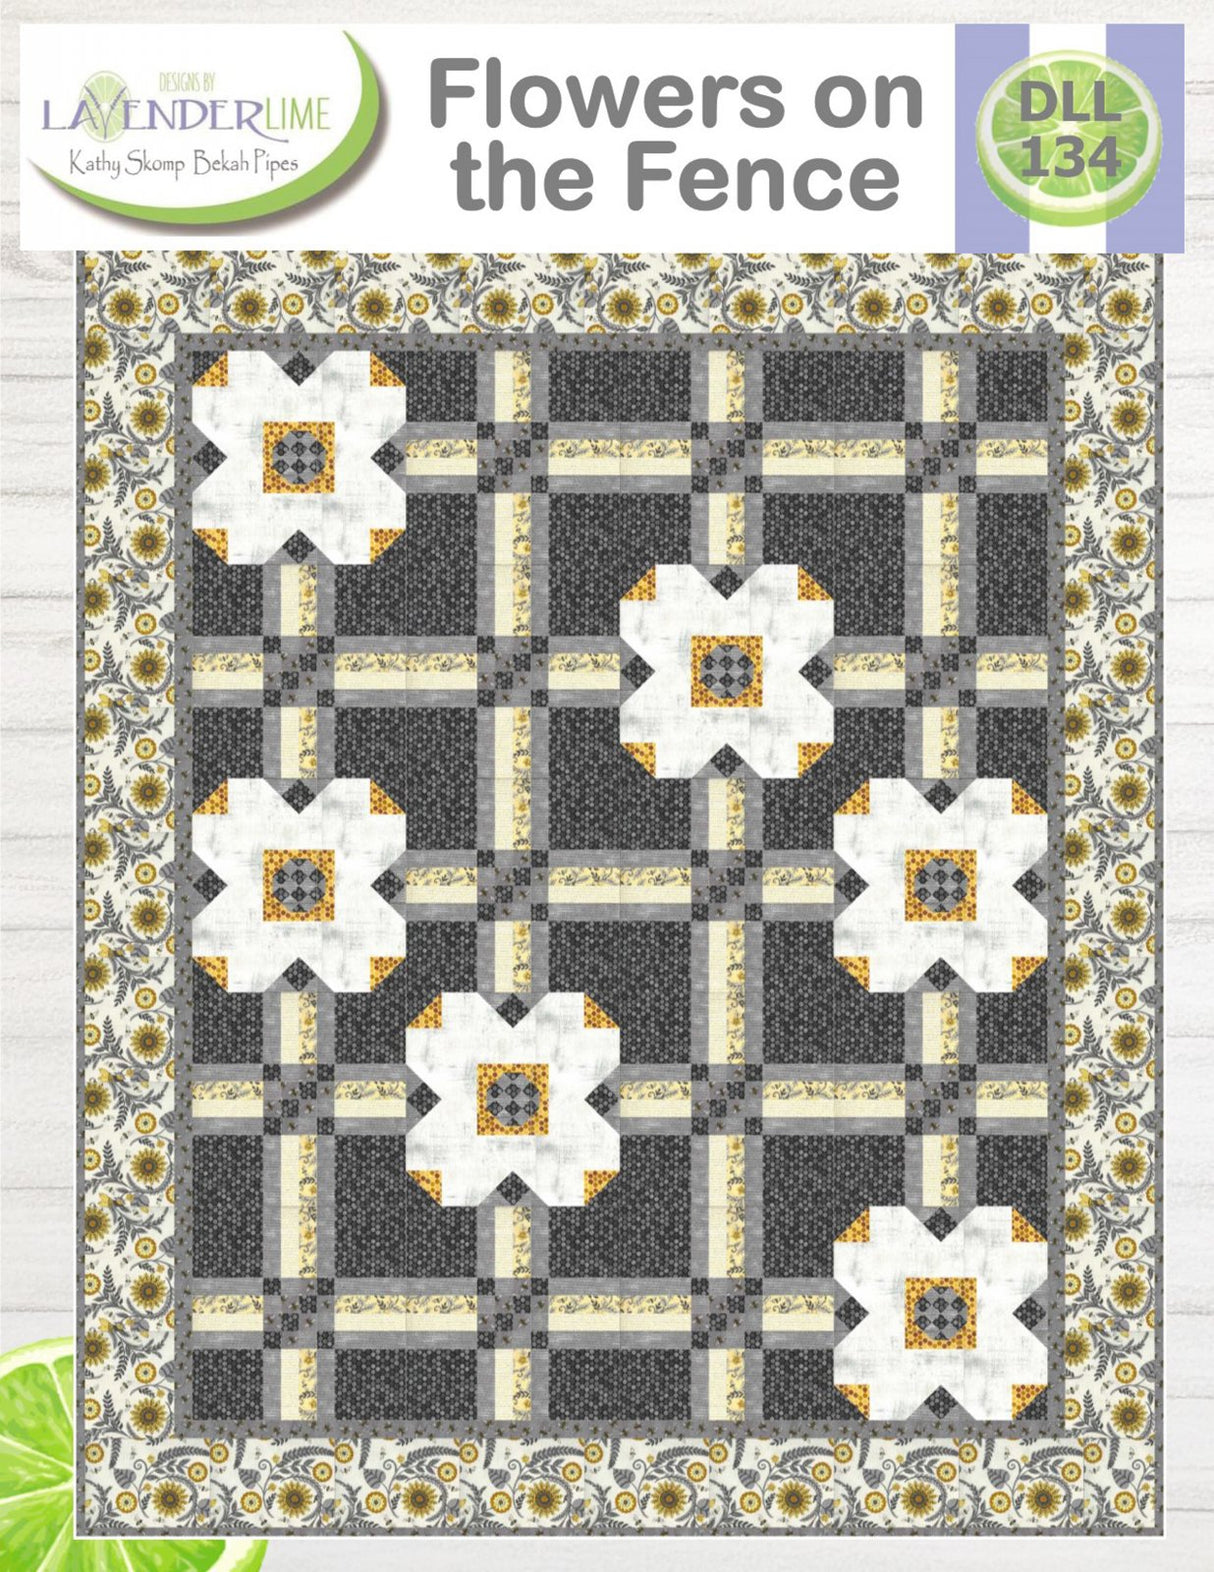 Flowers on the Fence Quilt Pattern by Lavender Lime Quilting